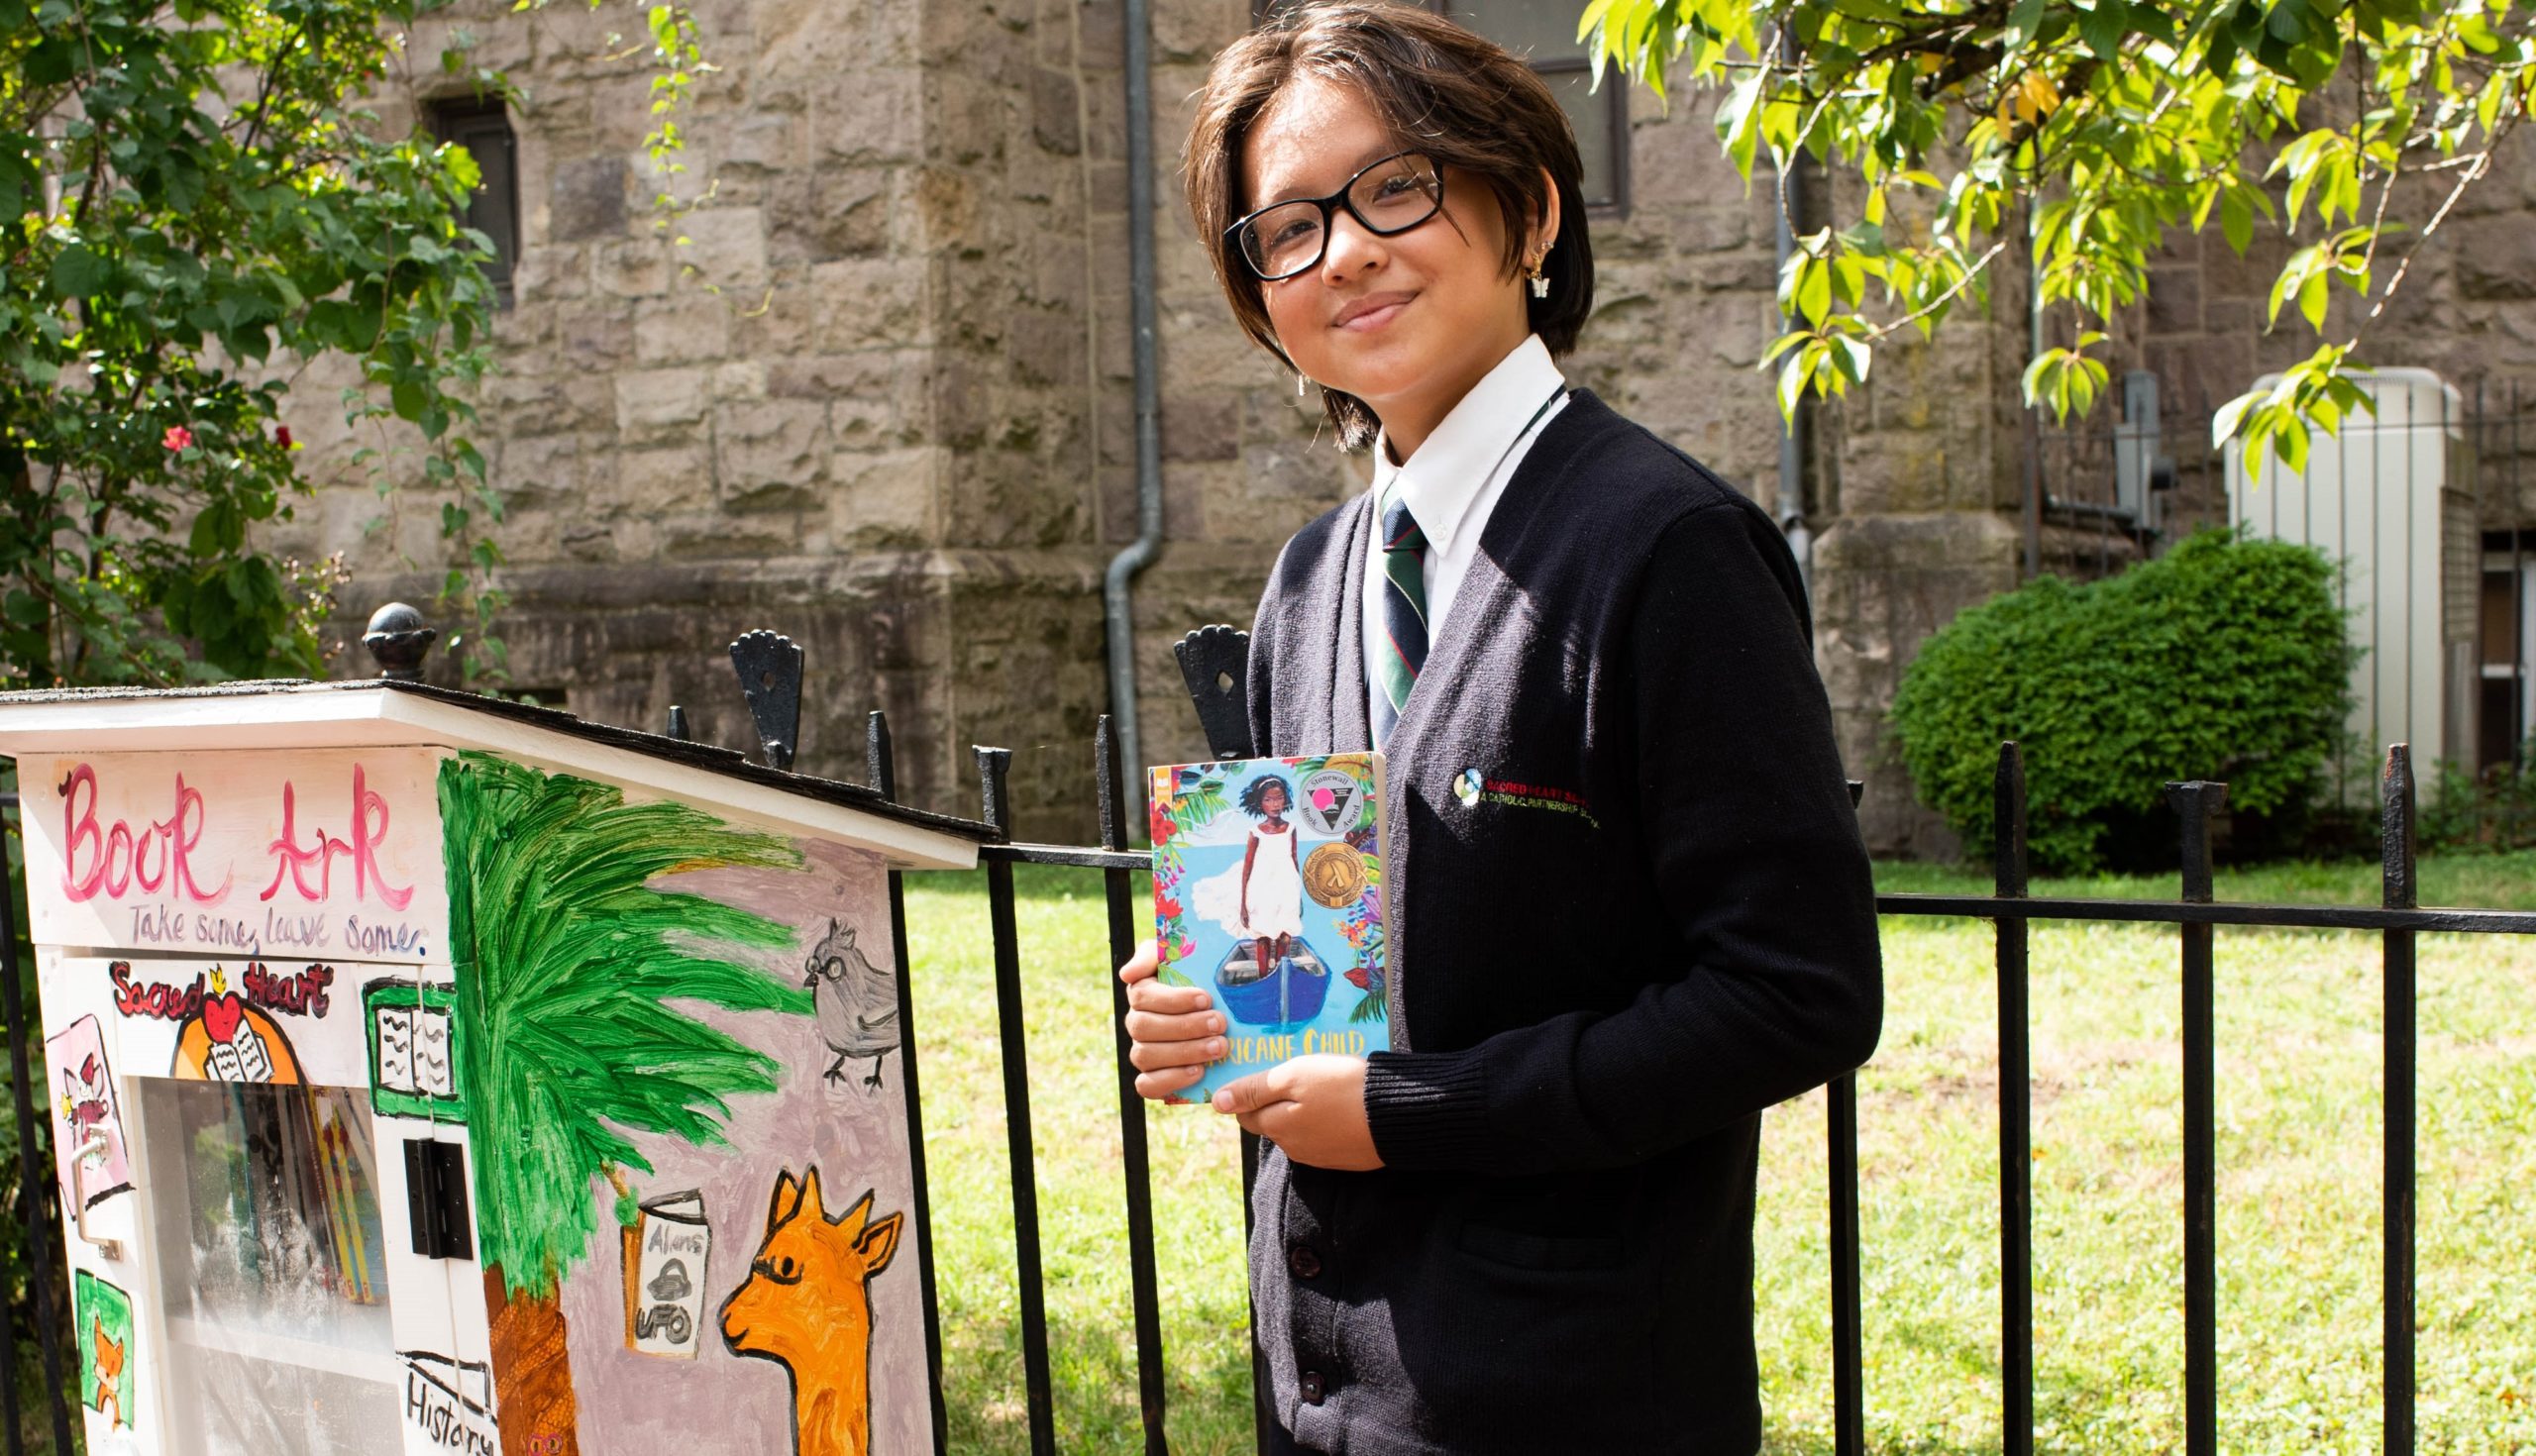 Student from Catholic Partnership Schools with the book ark she codesigned